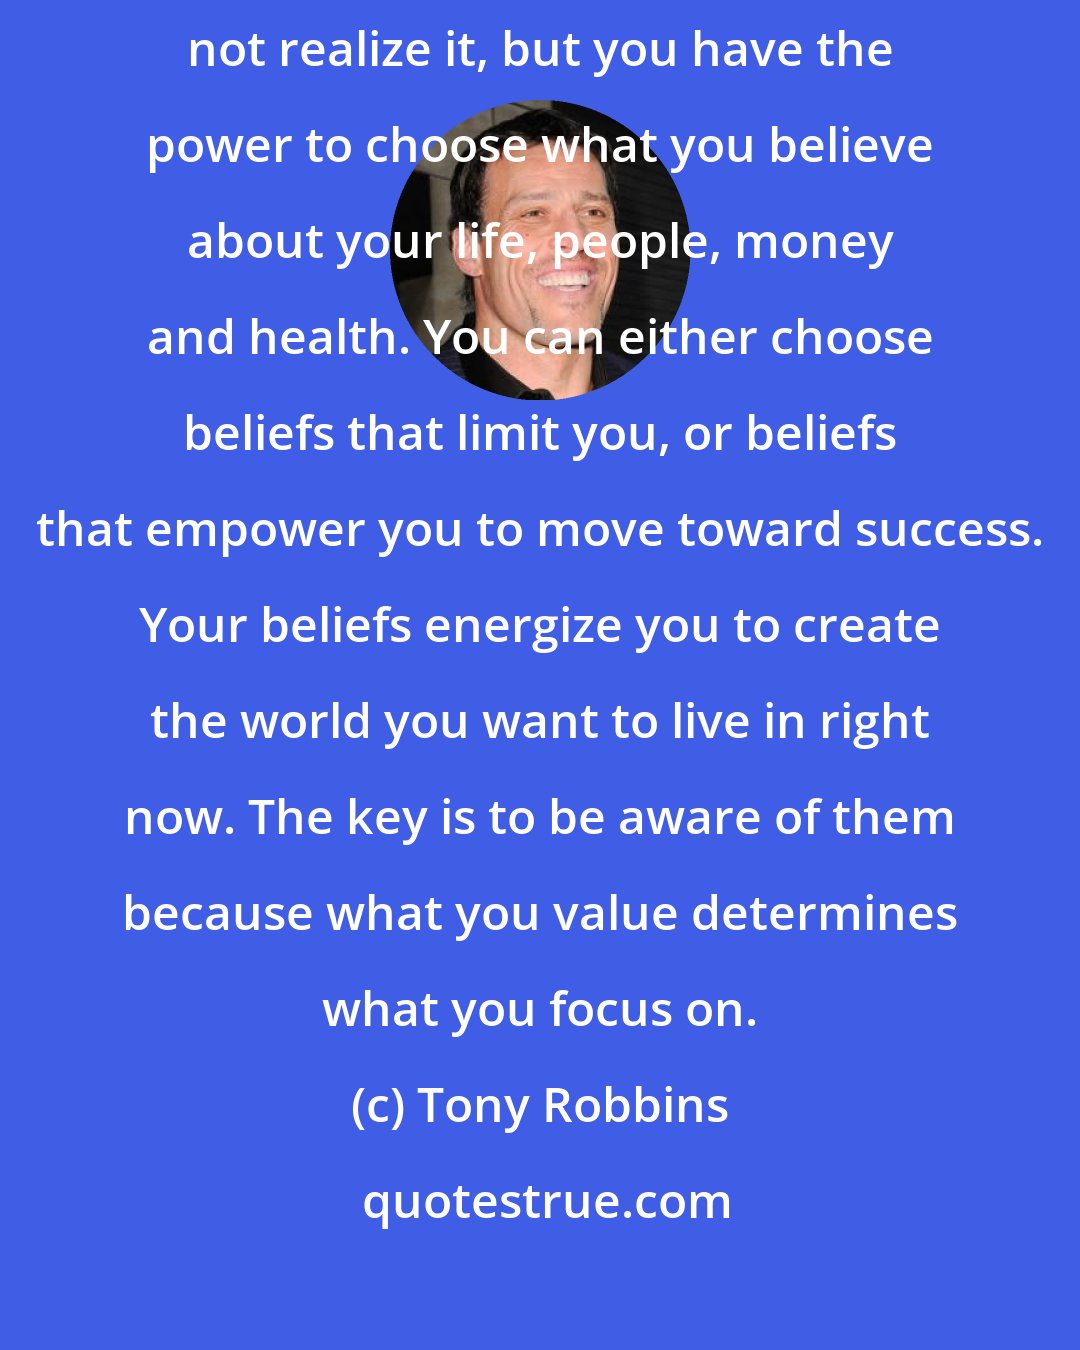 Tony Robbins: Every decision in your life is controlled by your beliefs and values. You may not realize it, but you have the power to choose what you believe about your life, people, money and health. You can either choose beliefs that limit you, or beliefs that empower you to move toward success. Your beliefs energize you to create the world you want to live in right now. The key is to be aware of them because what you value determines what you focus on.